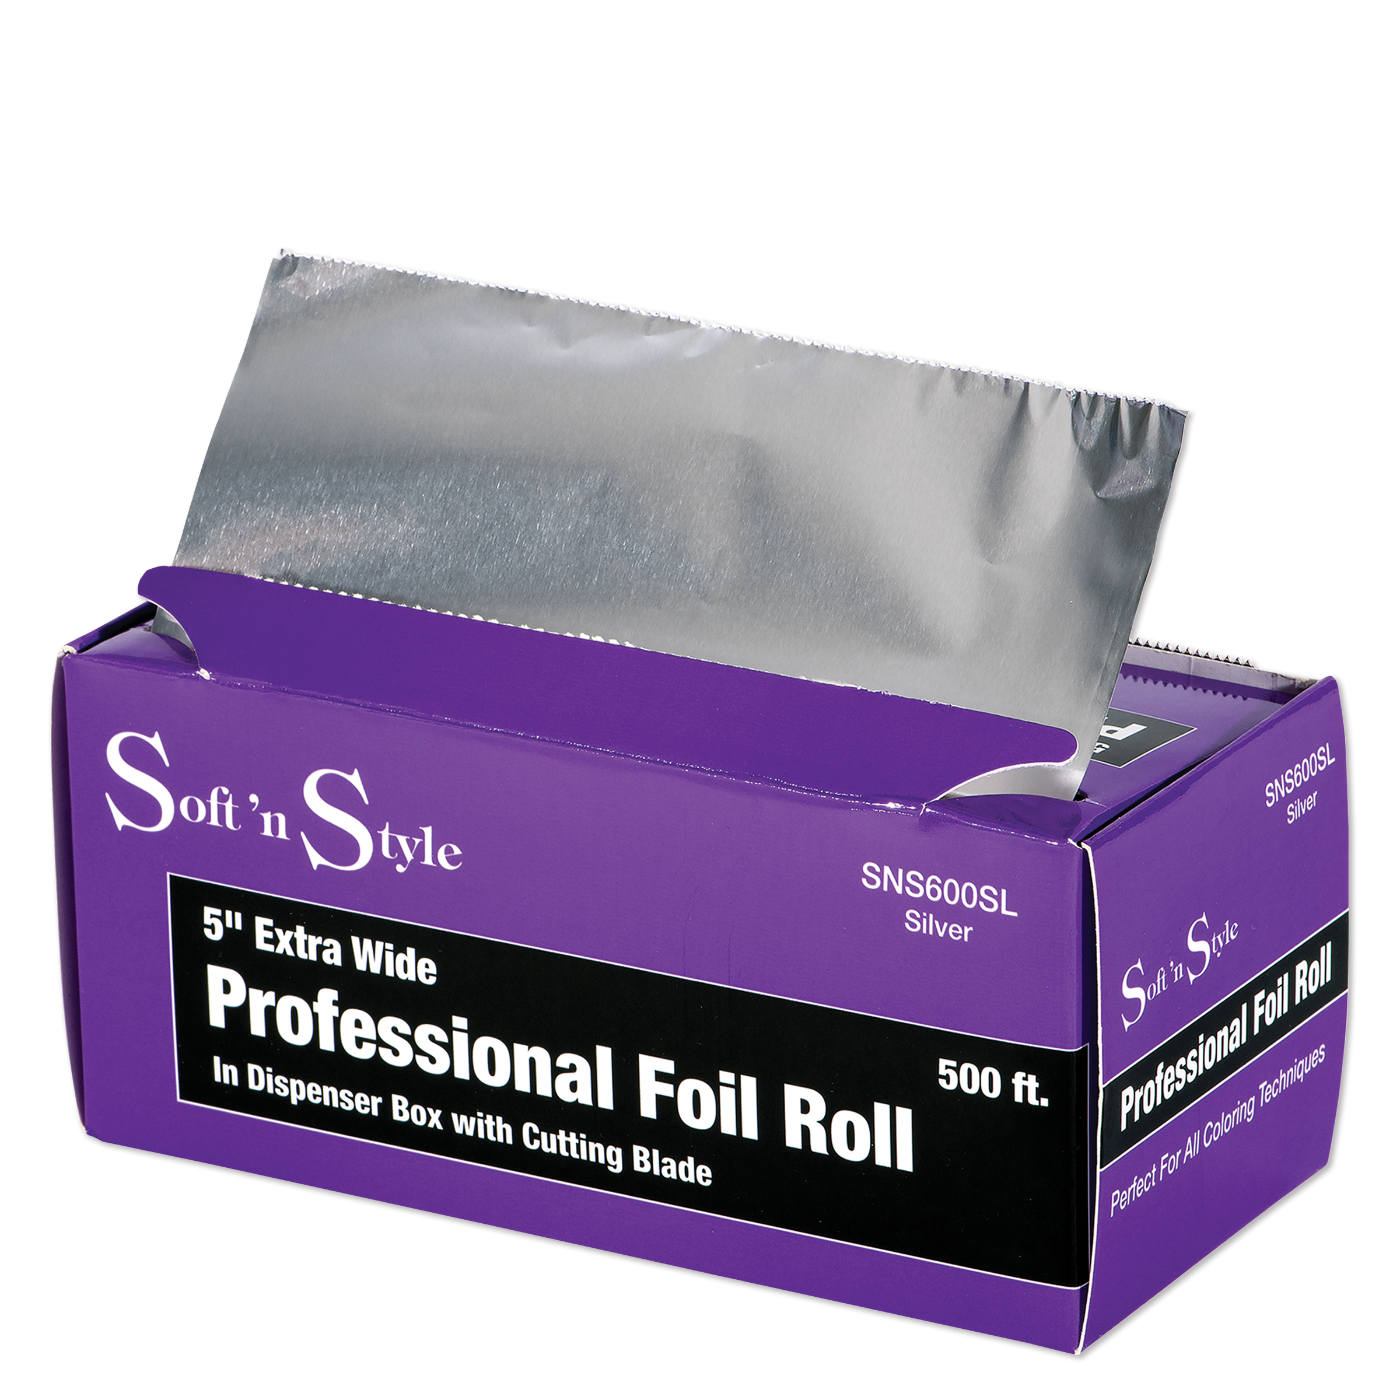 Professional Smooth Foil Roll - 5" x 500'